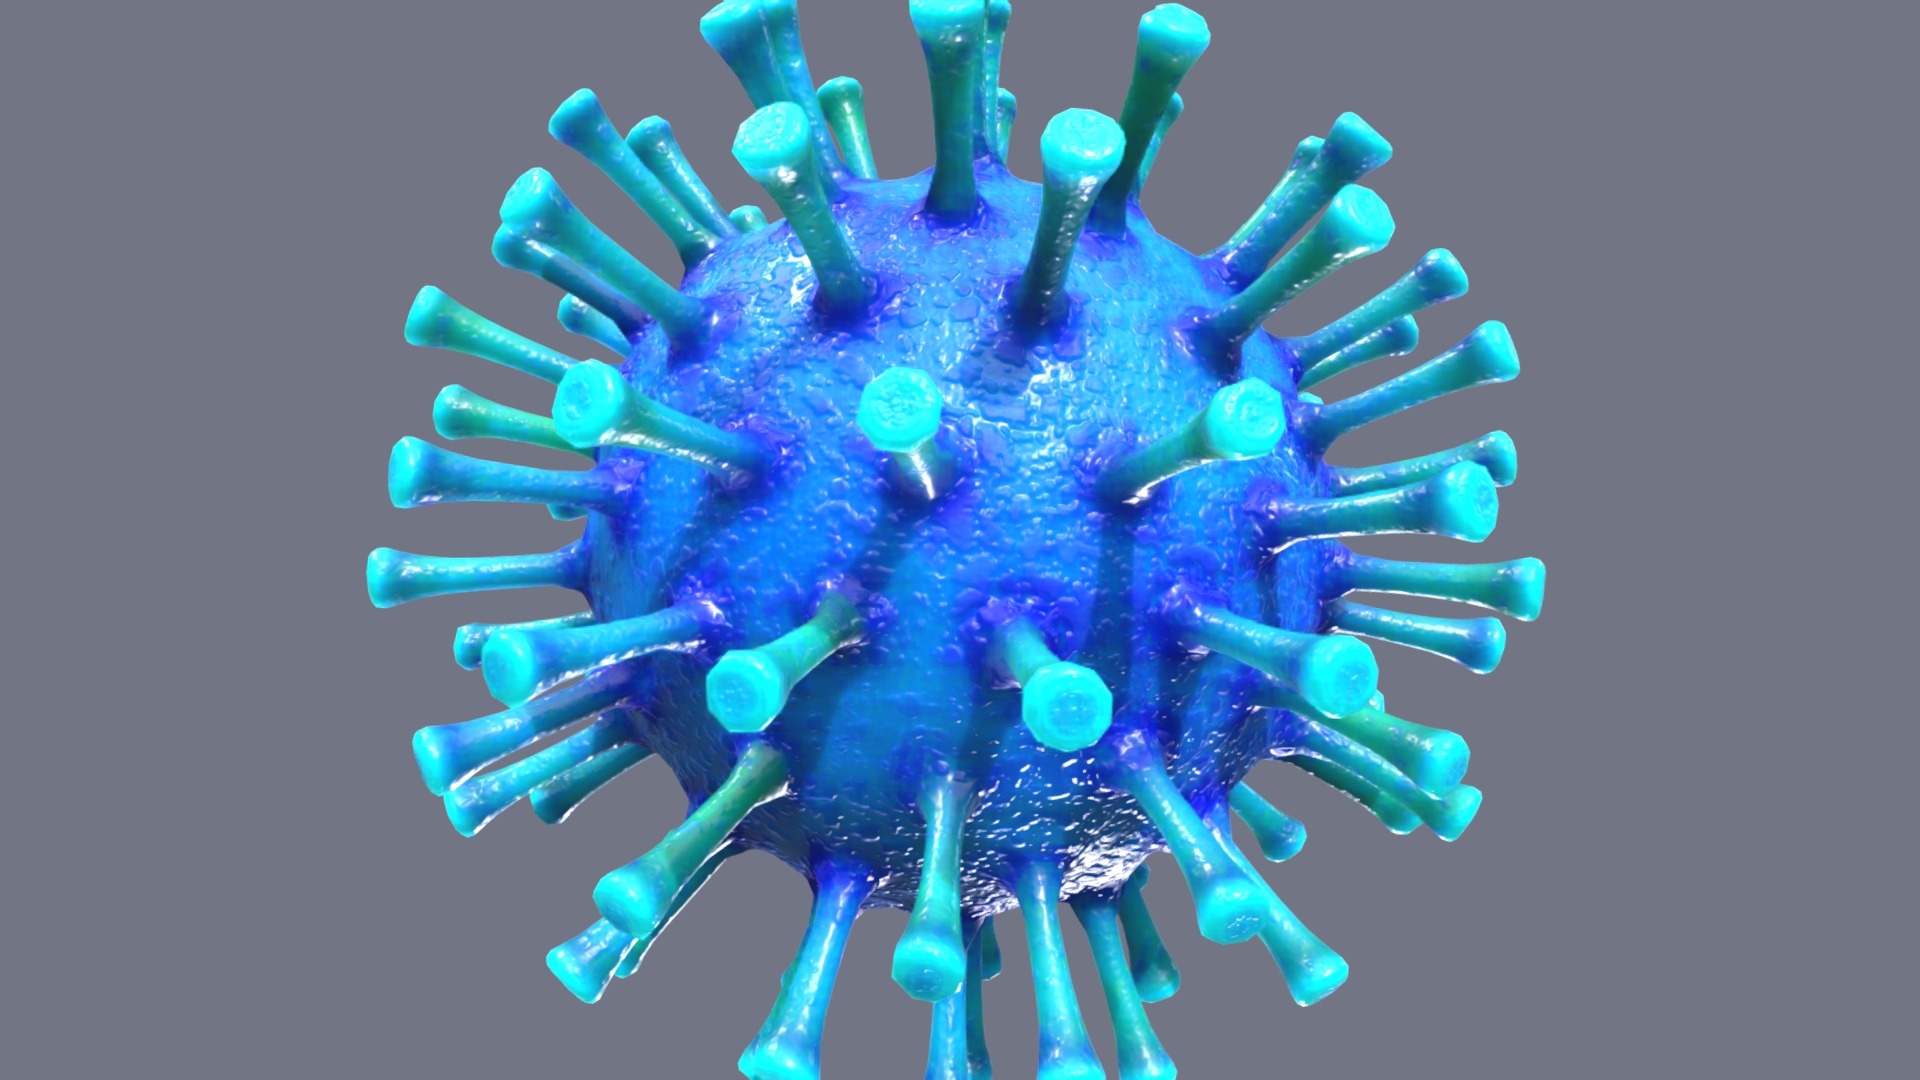 3D model Corona Virus Covid 19 - This is a 3D model of the Corona Virus Covid 19. The 3D model is about a blue flower with many small petals.